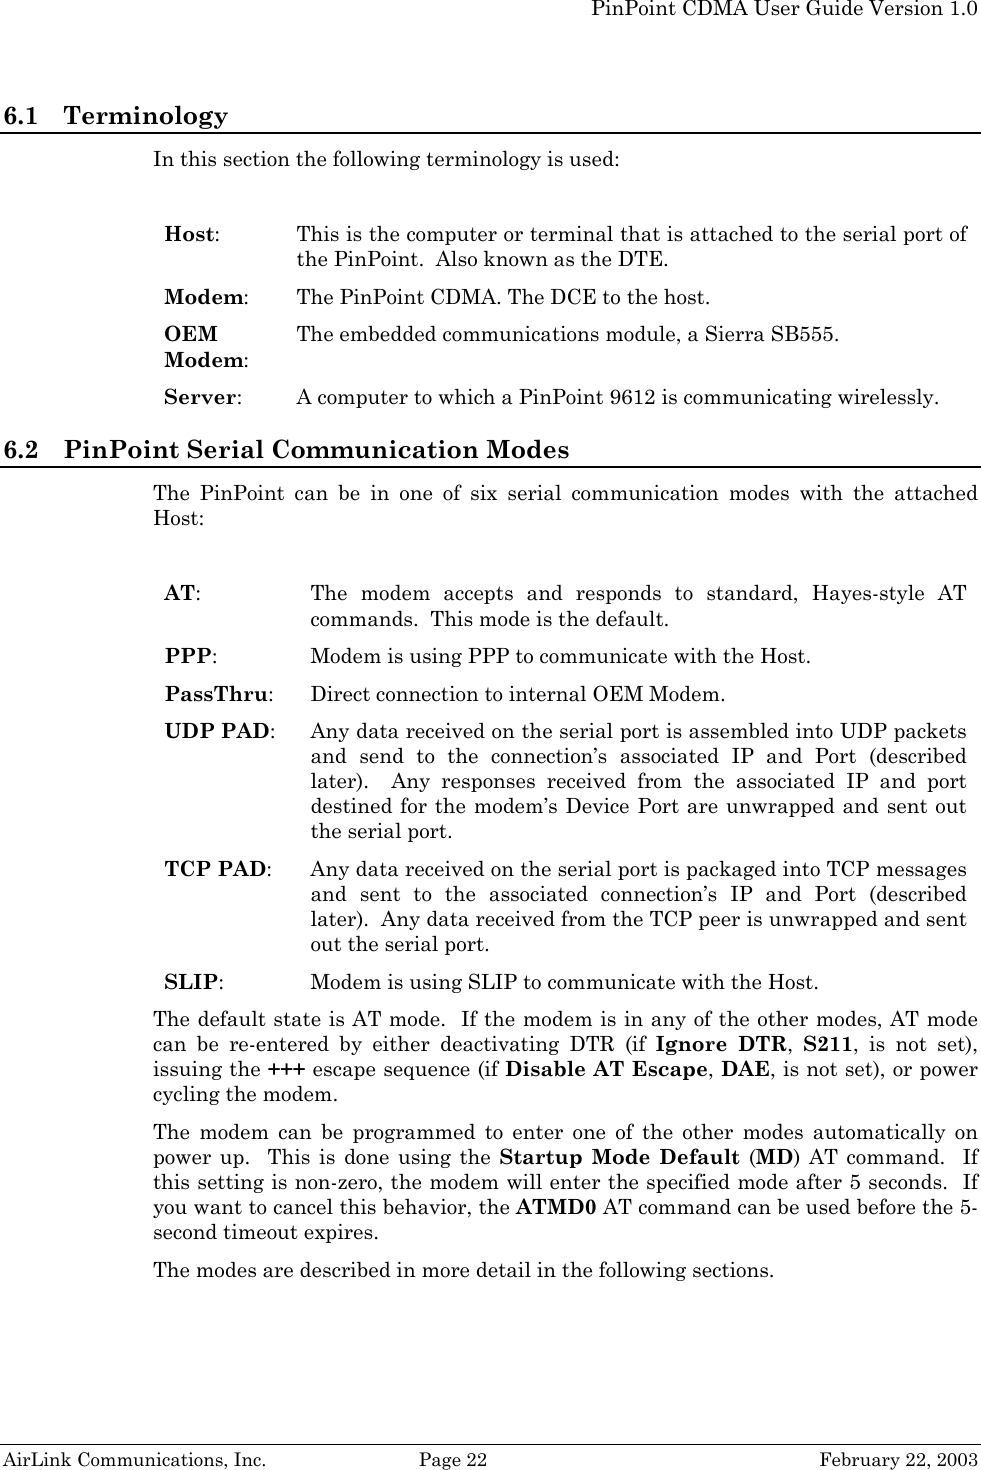   PinPoint CDMA User Guide Version 1.0   AirLink Communications, Inc.  Page 22  February 22, 2003 6.1 Terminology In this section the following terminology is used:  Host:  This is the computer or terminal that is attached to the serial port of the PinPoint.  Also known as the DTE. Modem:  The PinPoint CDMA. The DCE to the host. OEM Modem: The embedded communications module, a Sierra SB555. Server:    A computer to which a PinPoint 9612 is communicating wirelessly. 6.2 PinPoint Serial Communication Modes The PinPoint can be in one of six serial communication modes with the attached Host:  AT:  The modem accepts and responds to standard, Hayes-style AT commands.  This mode is the default.  PPP:  Modem is using PPP to communicate with the Host. PassThru:  Direct connection to internal OEM Modem. UDP PAD:  Any data received on the serial port is assembled into UDP packets and send to the connection’s associated IP and Port (described later).  Any responses received from the associated IP and port destined for the modem’s Device Port are unwrapped and sent out the serial port. TCP PAD:  Any data received on the serial port is packaged into TCP messages and sent to the associated connection’s IP and Port (described later).  Any data received from the TCP peer is unwrapped and sent out the serial port. SLIP:  Modem is using SLIP to communicate with the Host. The default state is AT mode.  If the modem is in any of the other modes, AT mode can be re-entered by either deactivating DTR (if Ignore DTR,  S211, is not set), issuing the +++ escape sequence (if Disable AT Escape, DAE, is not set), or power cycling the modem. The modem can be programmed to enter one of the other modes automatically on power up.  This is done using the Startup Mode Default (MD) AT command.  If this setting is non-zero, the modem will enter the specified mode after 5 seconds.  If you want to cancel this behavior, the ATMD0 AT command can be used before the 5-second timeout expires. The modes are described in more detail in the following sections. 